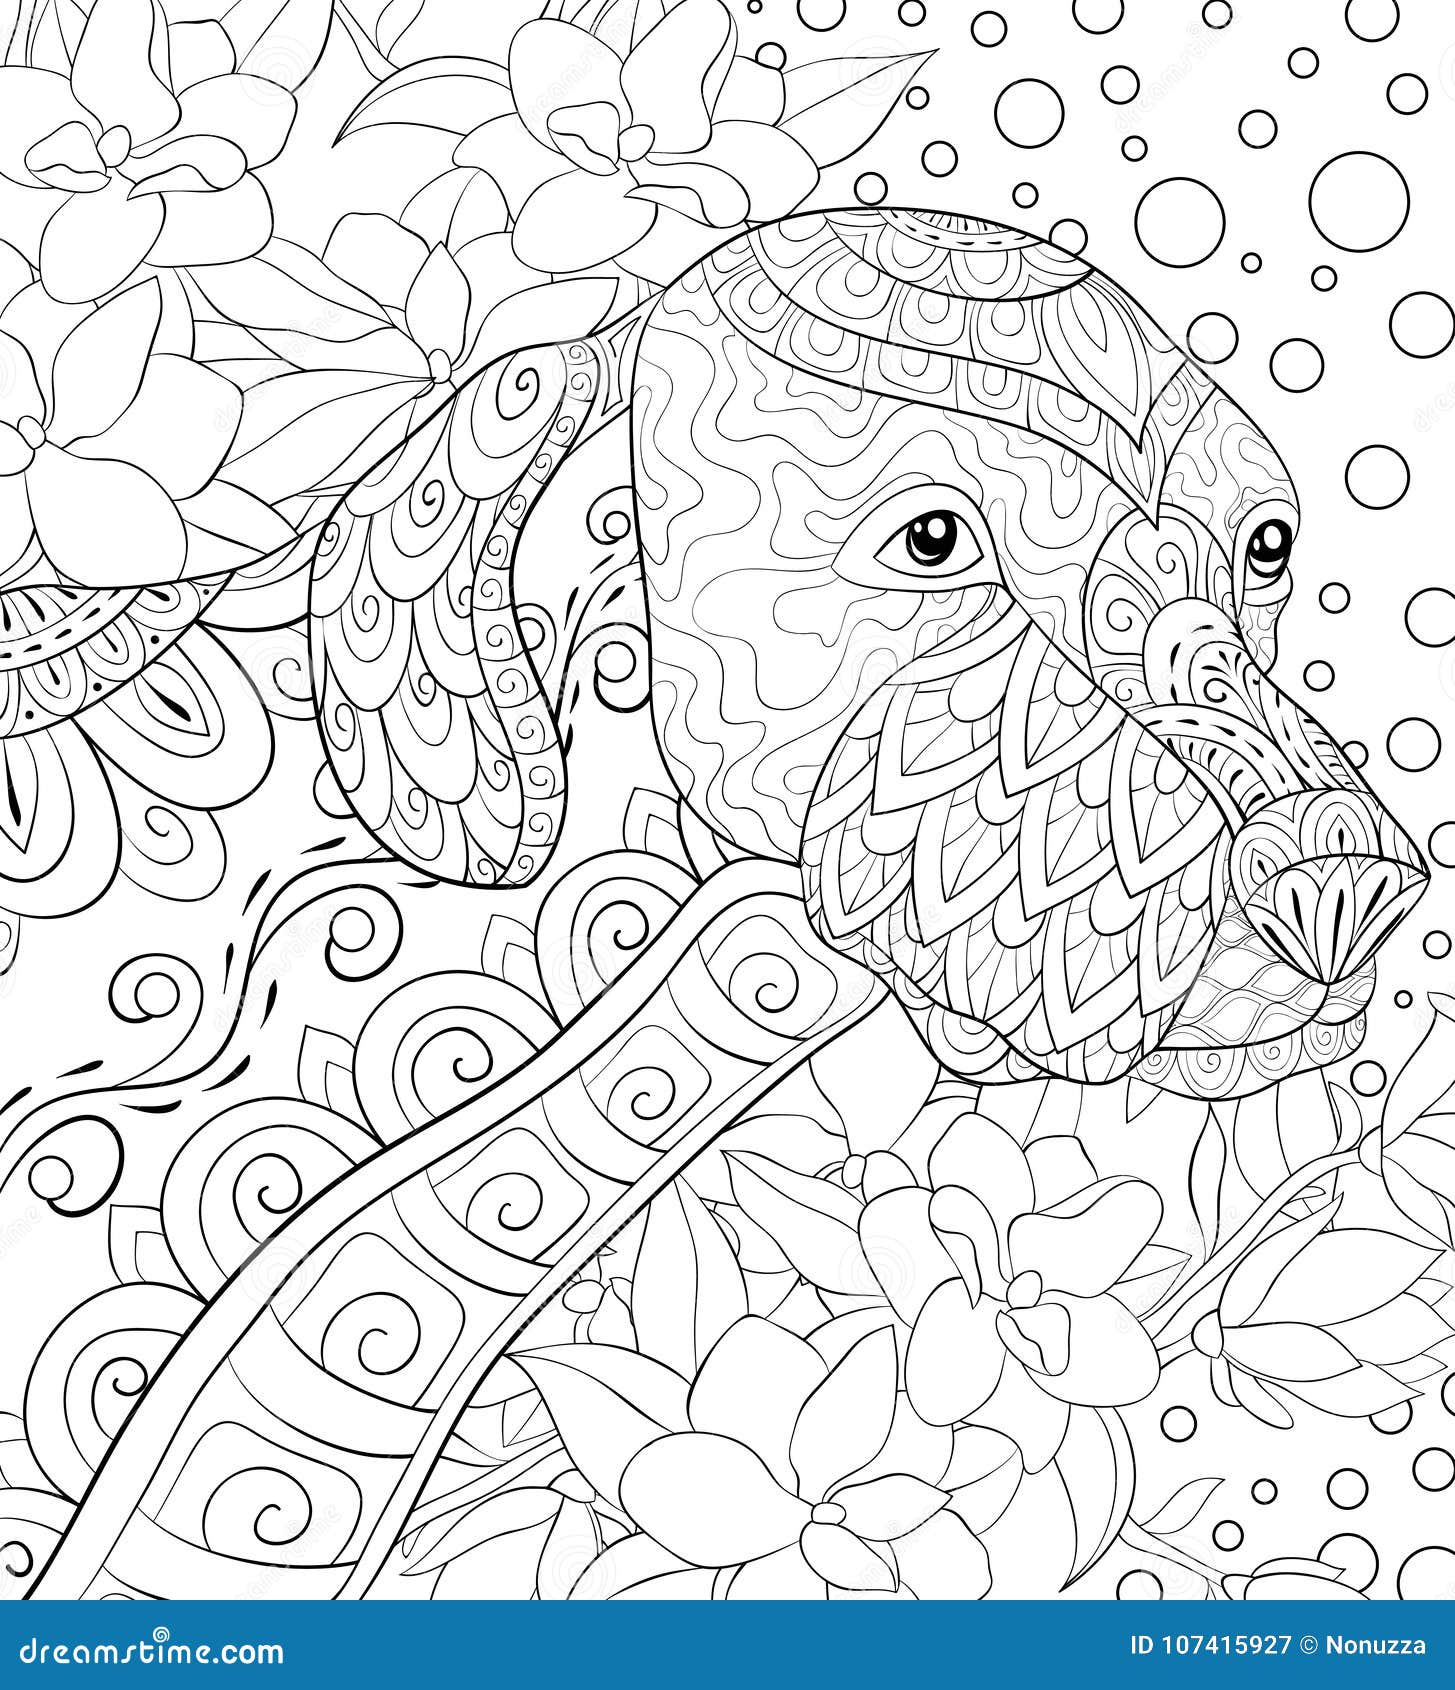 Adult Coloring Page A Cute Dog On The Floral Background ...